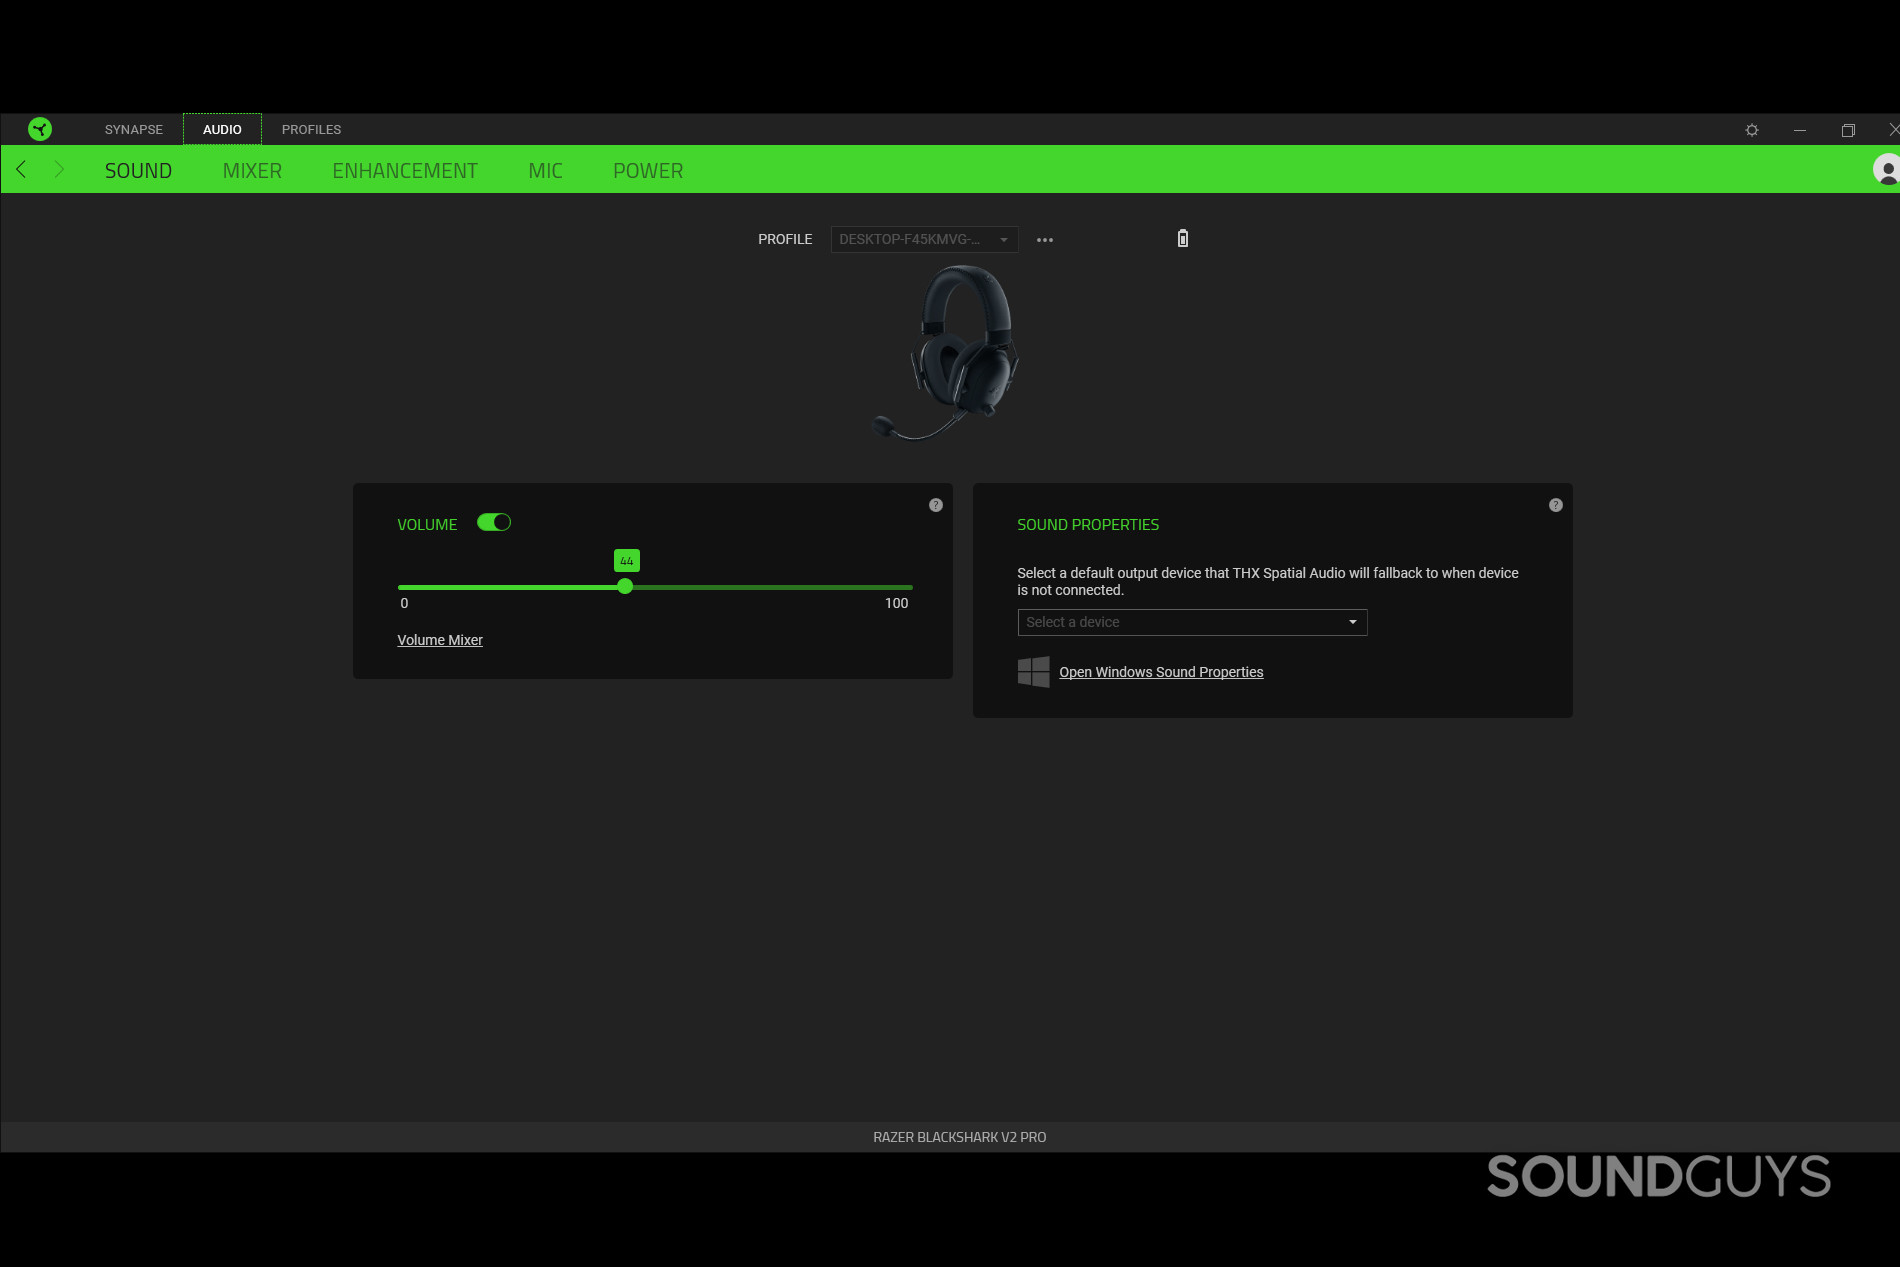 A screenshot from the Razer Synapse software connected to the Razer BlackShark V2 Pro